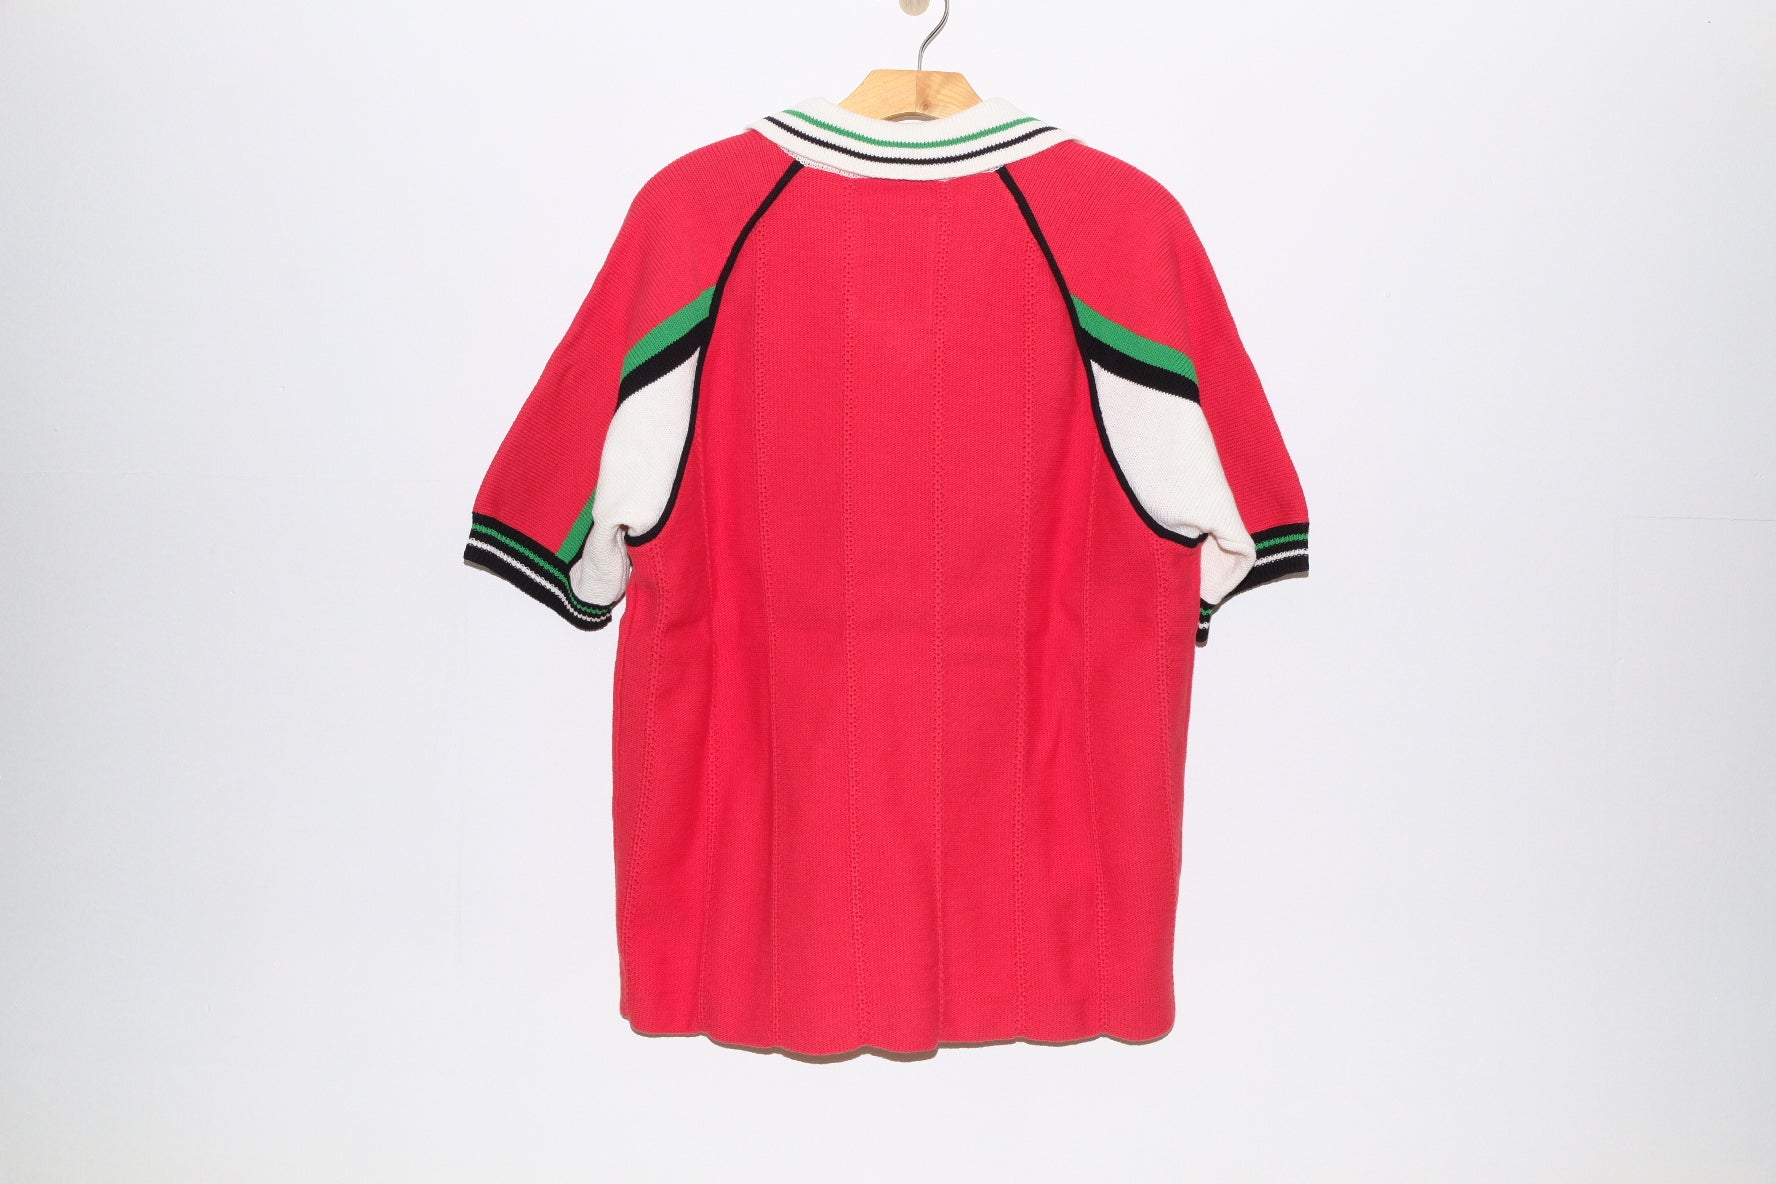 knitted soccer jersey in red